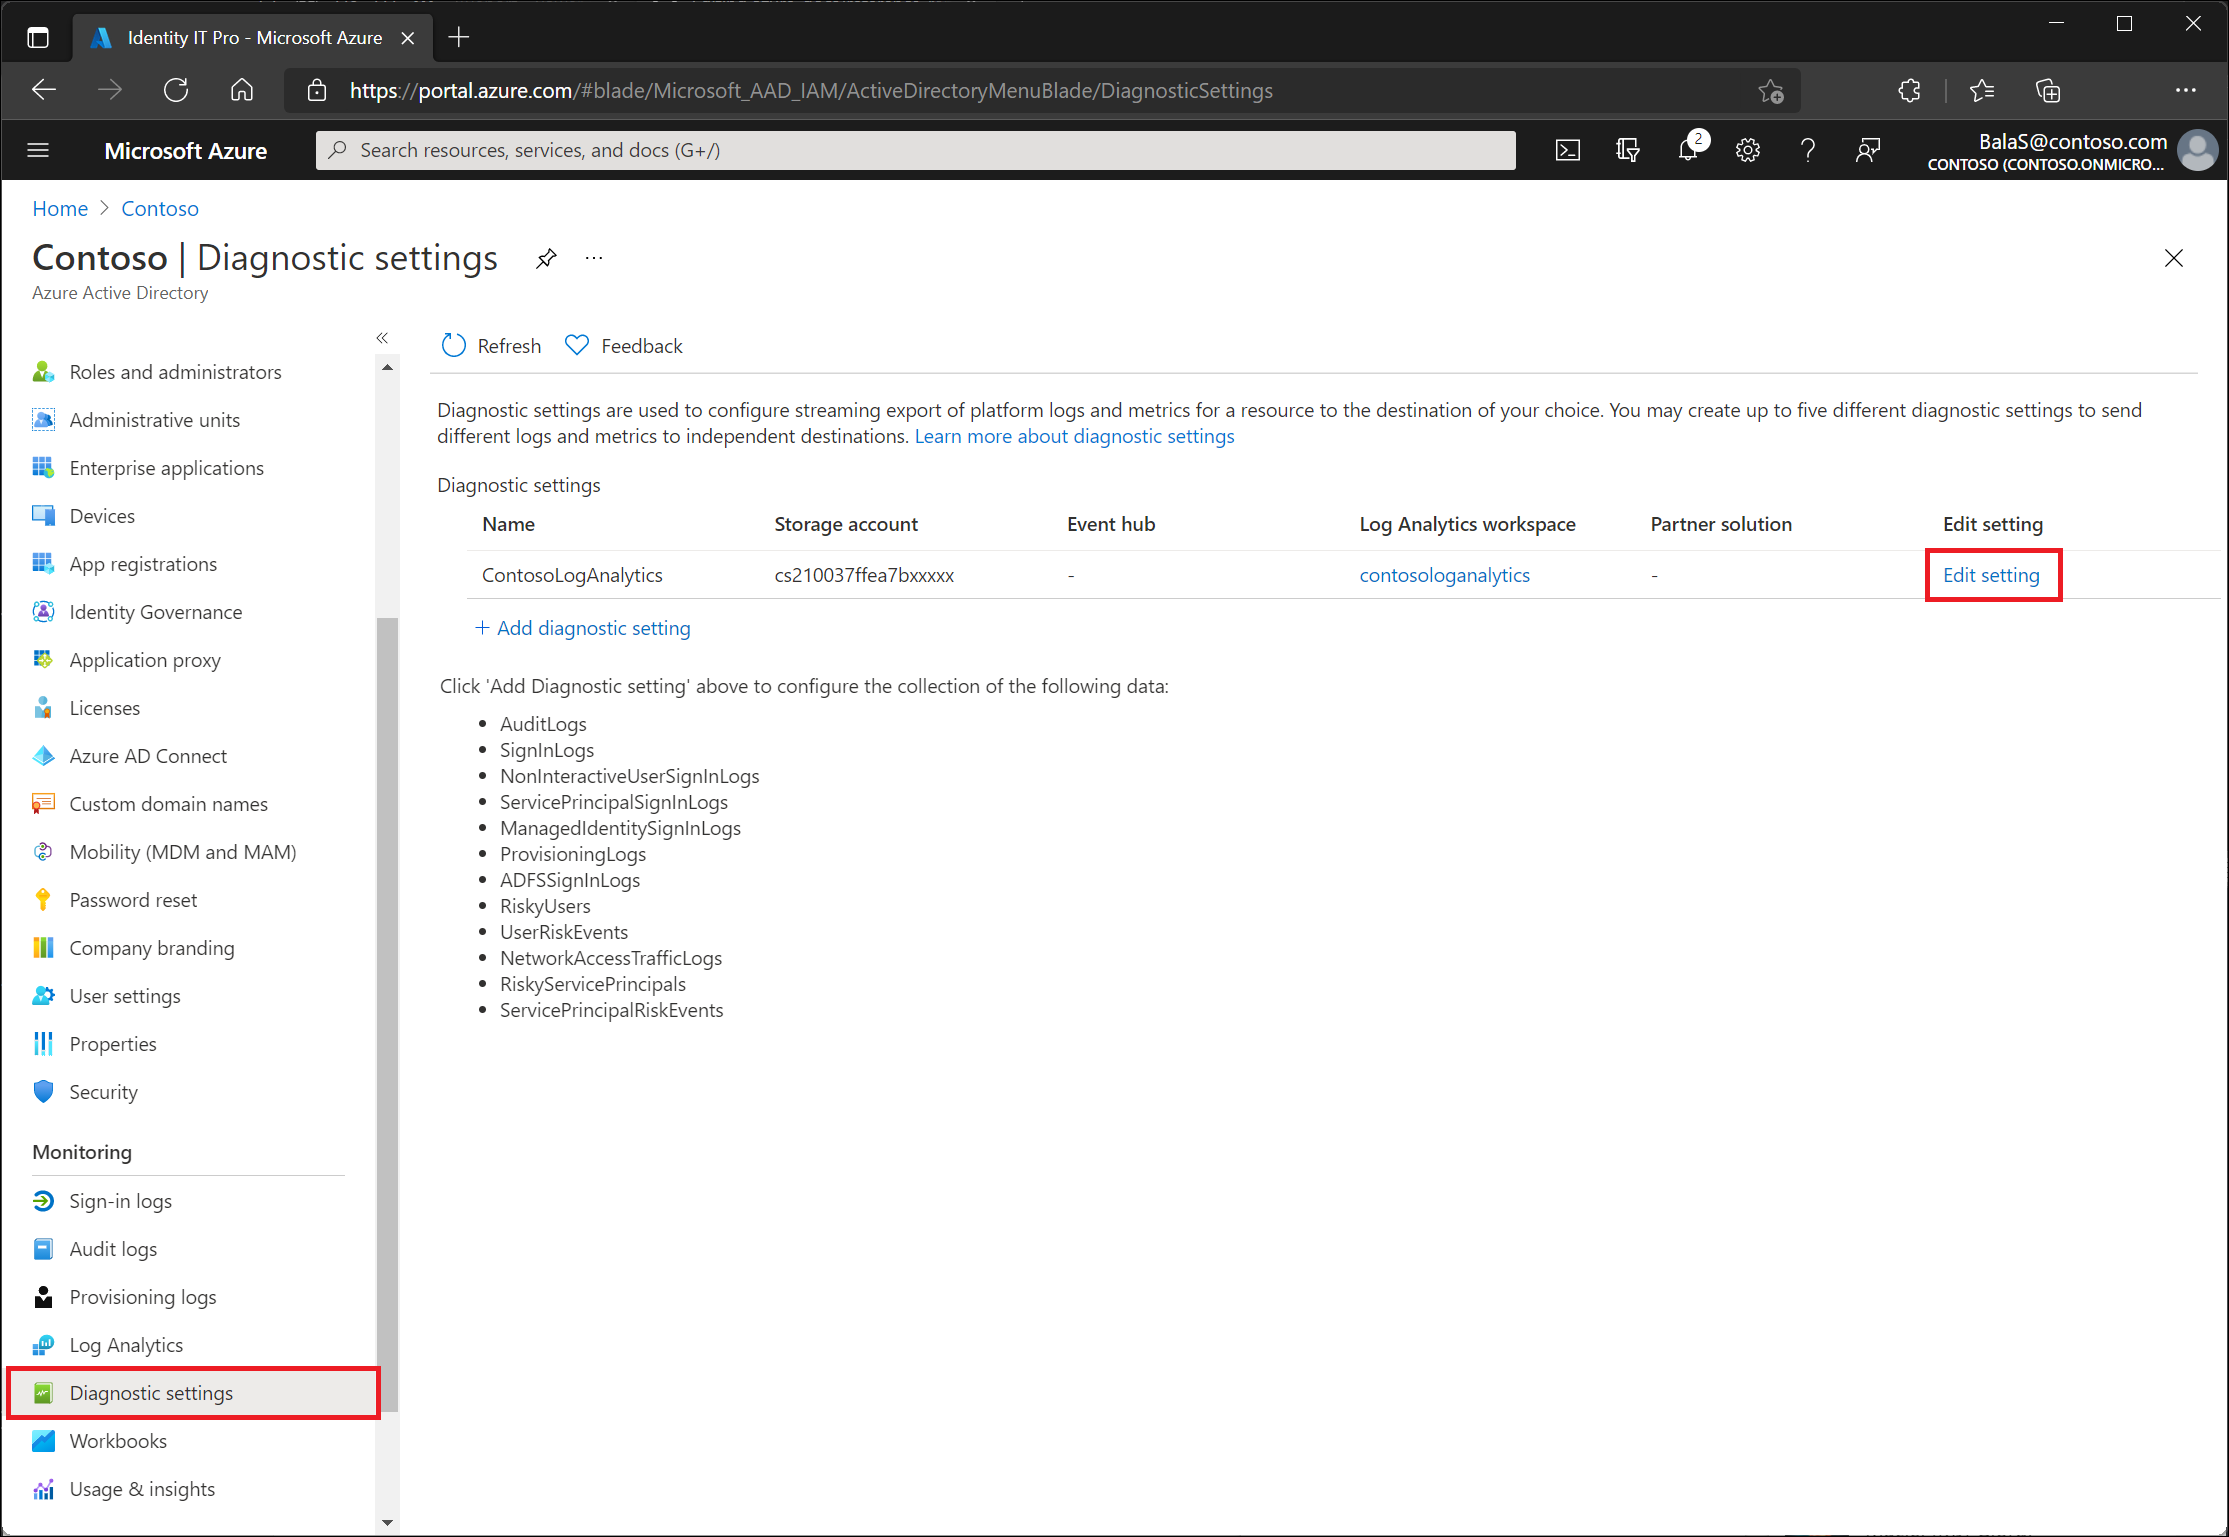 Diagnostic settings screen in Azure AD showing existing configuration